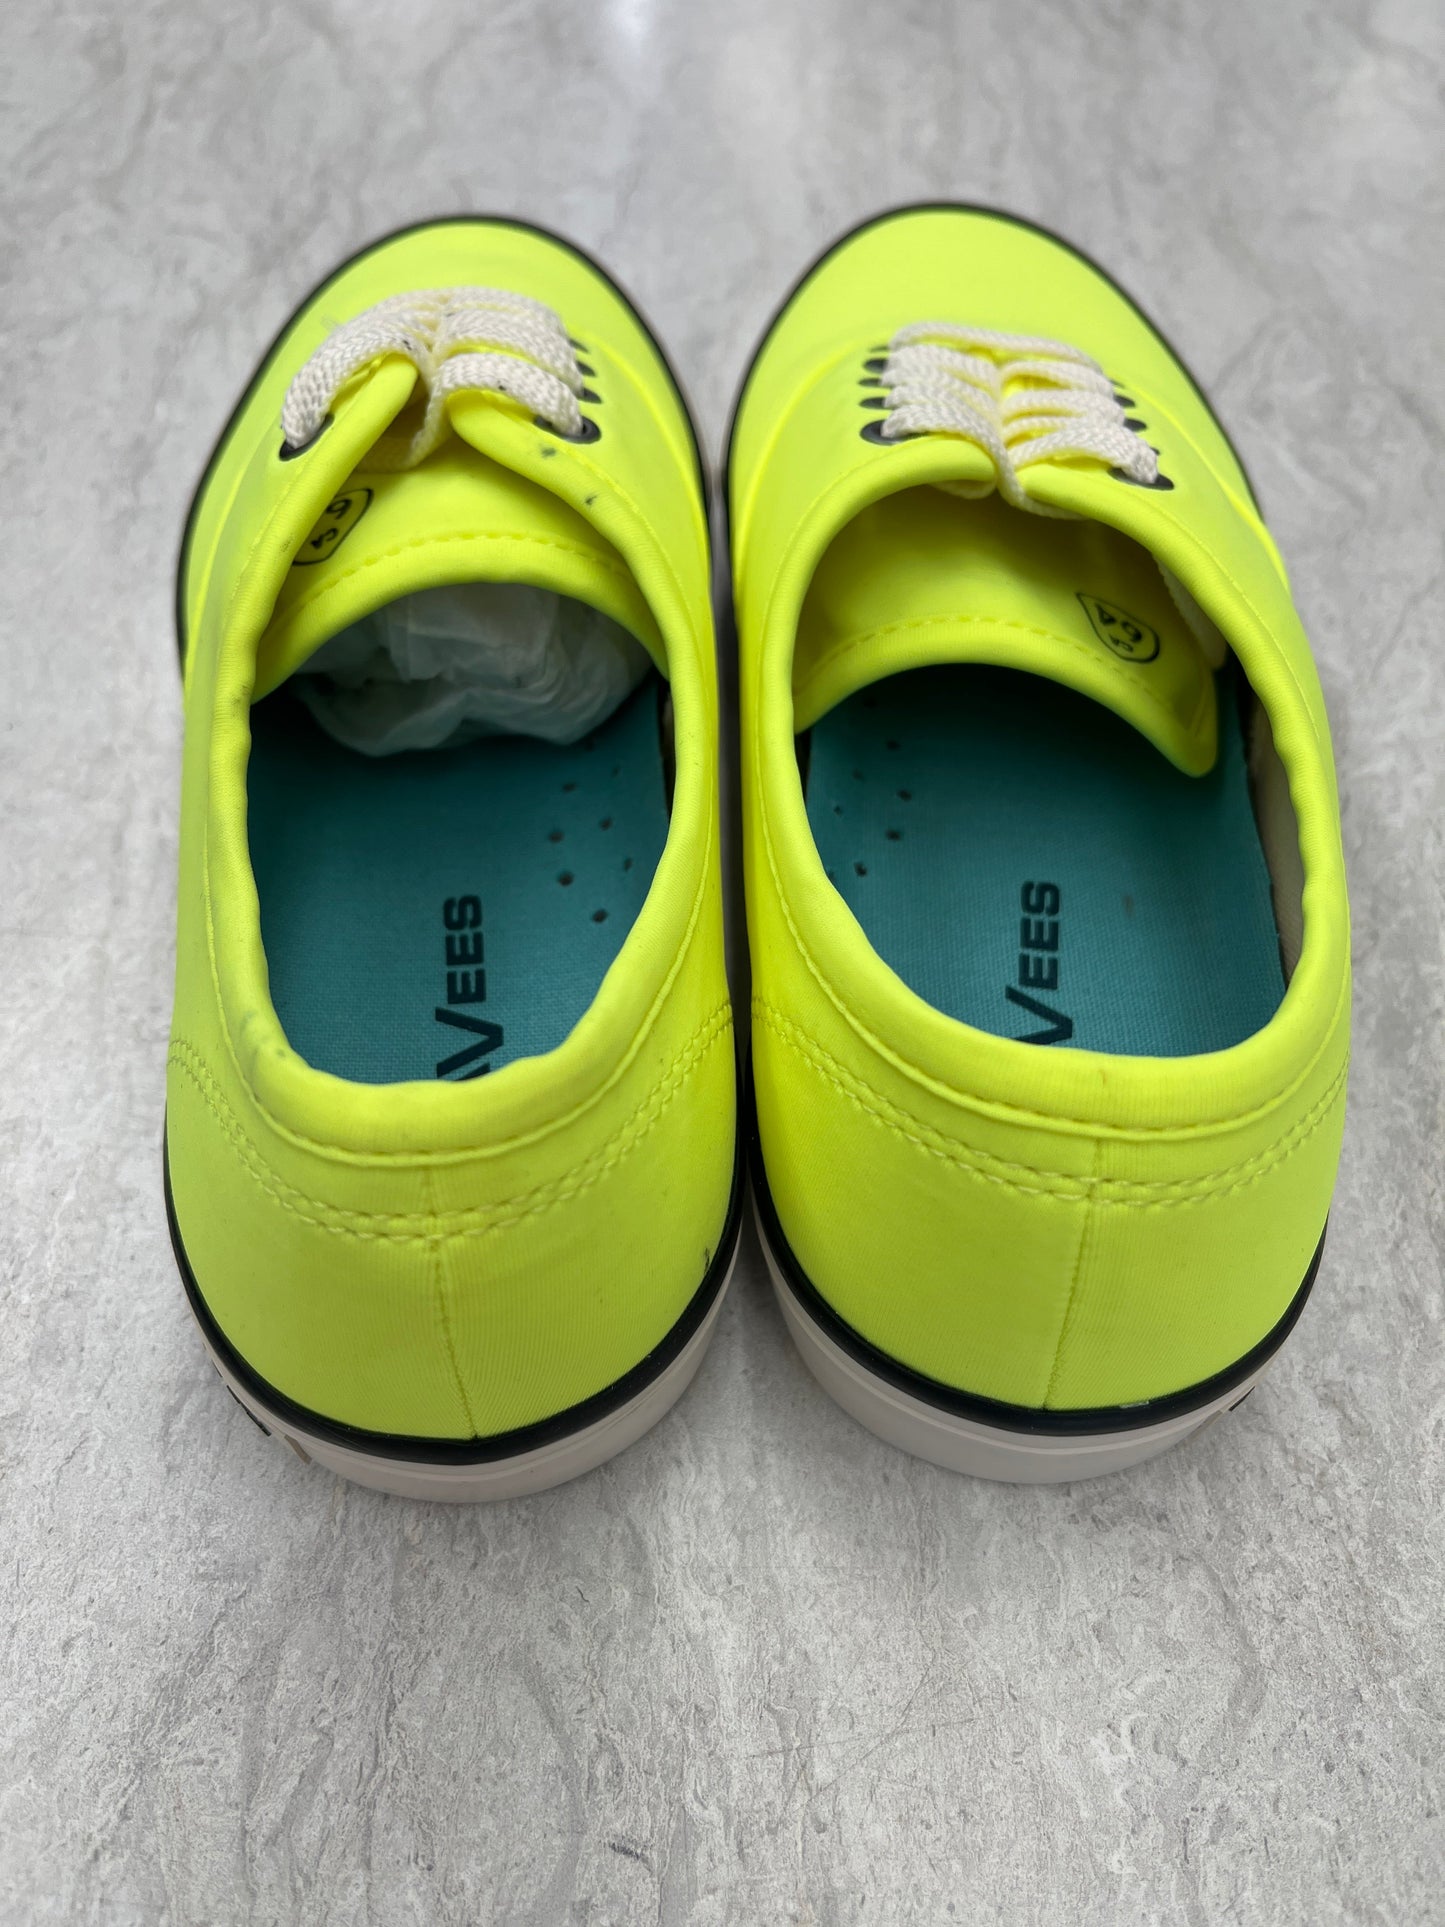 Yellow Shoes Sneakers Clothes Mentor, Size 7.5